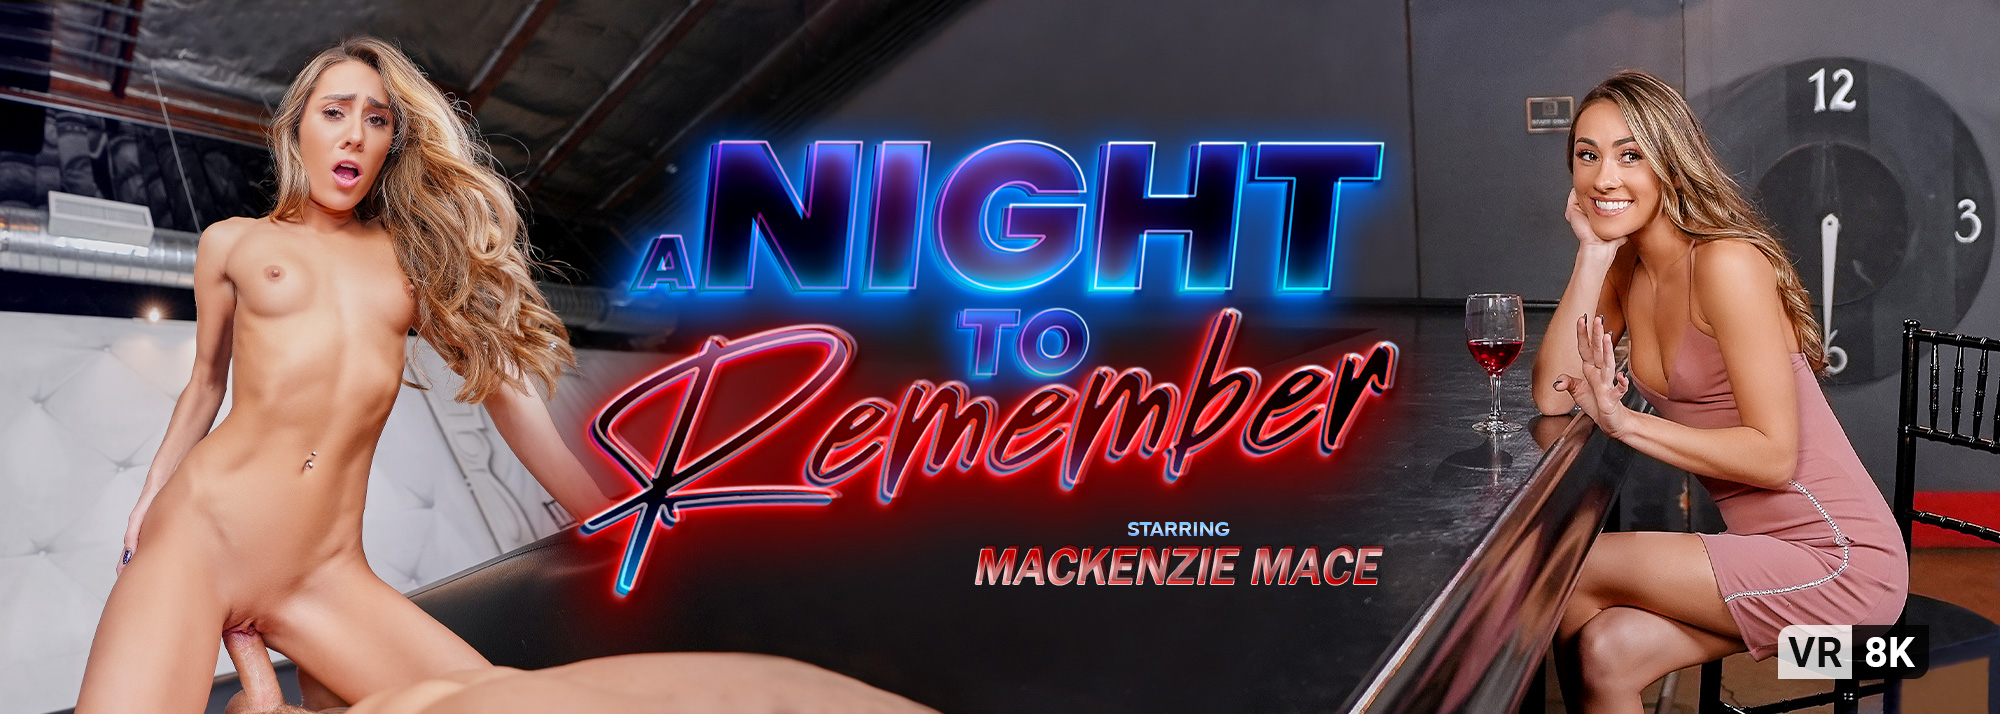 A Night to Remember - VR Porn Video, Starring: Mackenzie Mace